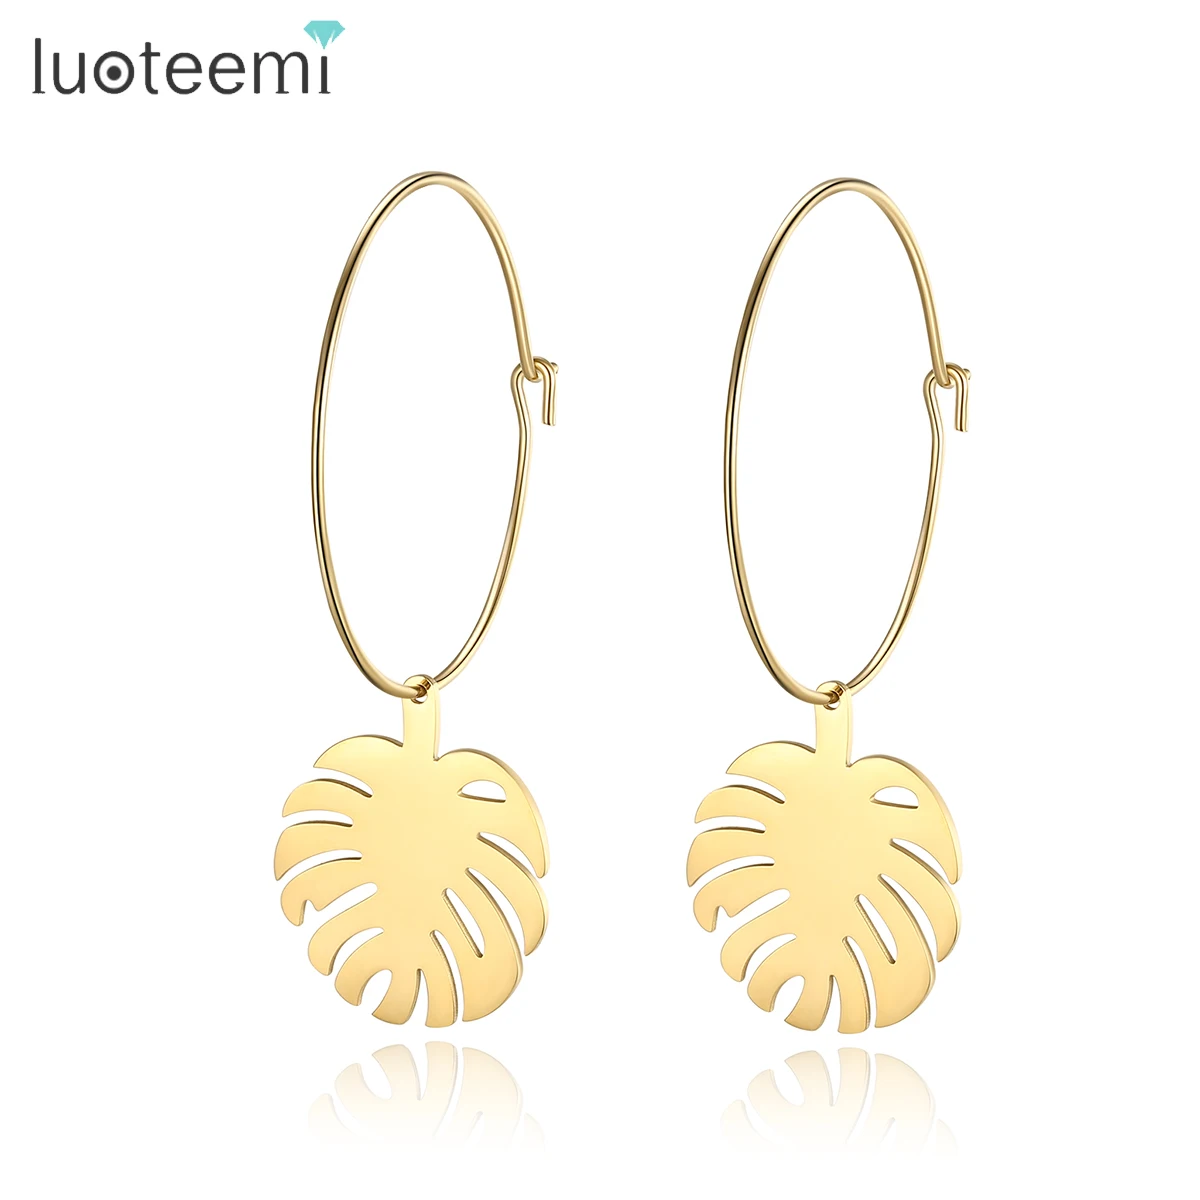 

SP-LAM Good Quality Indian Gold Plated Stainless Steel Huggie Fashionable Hoop Earrings for Women